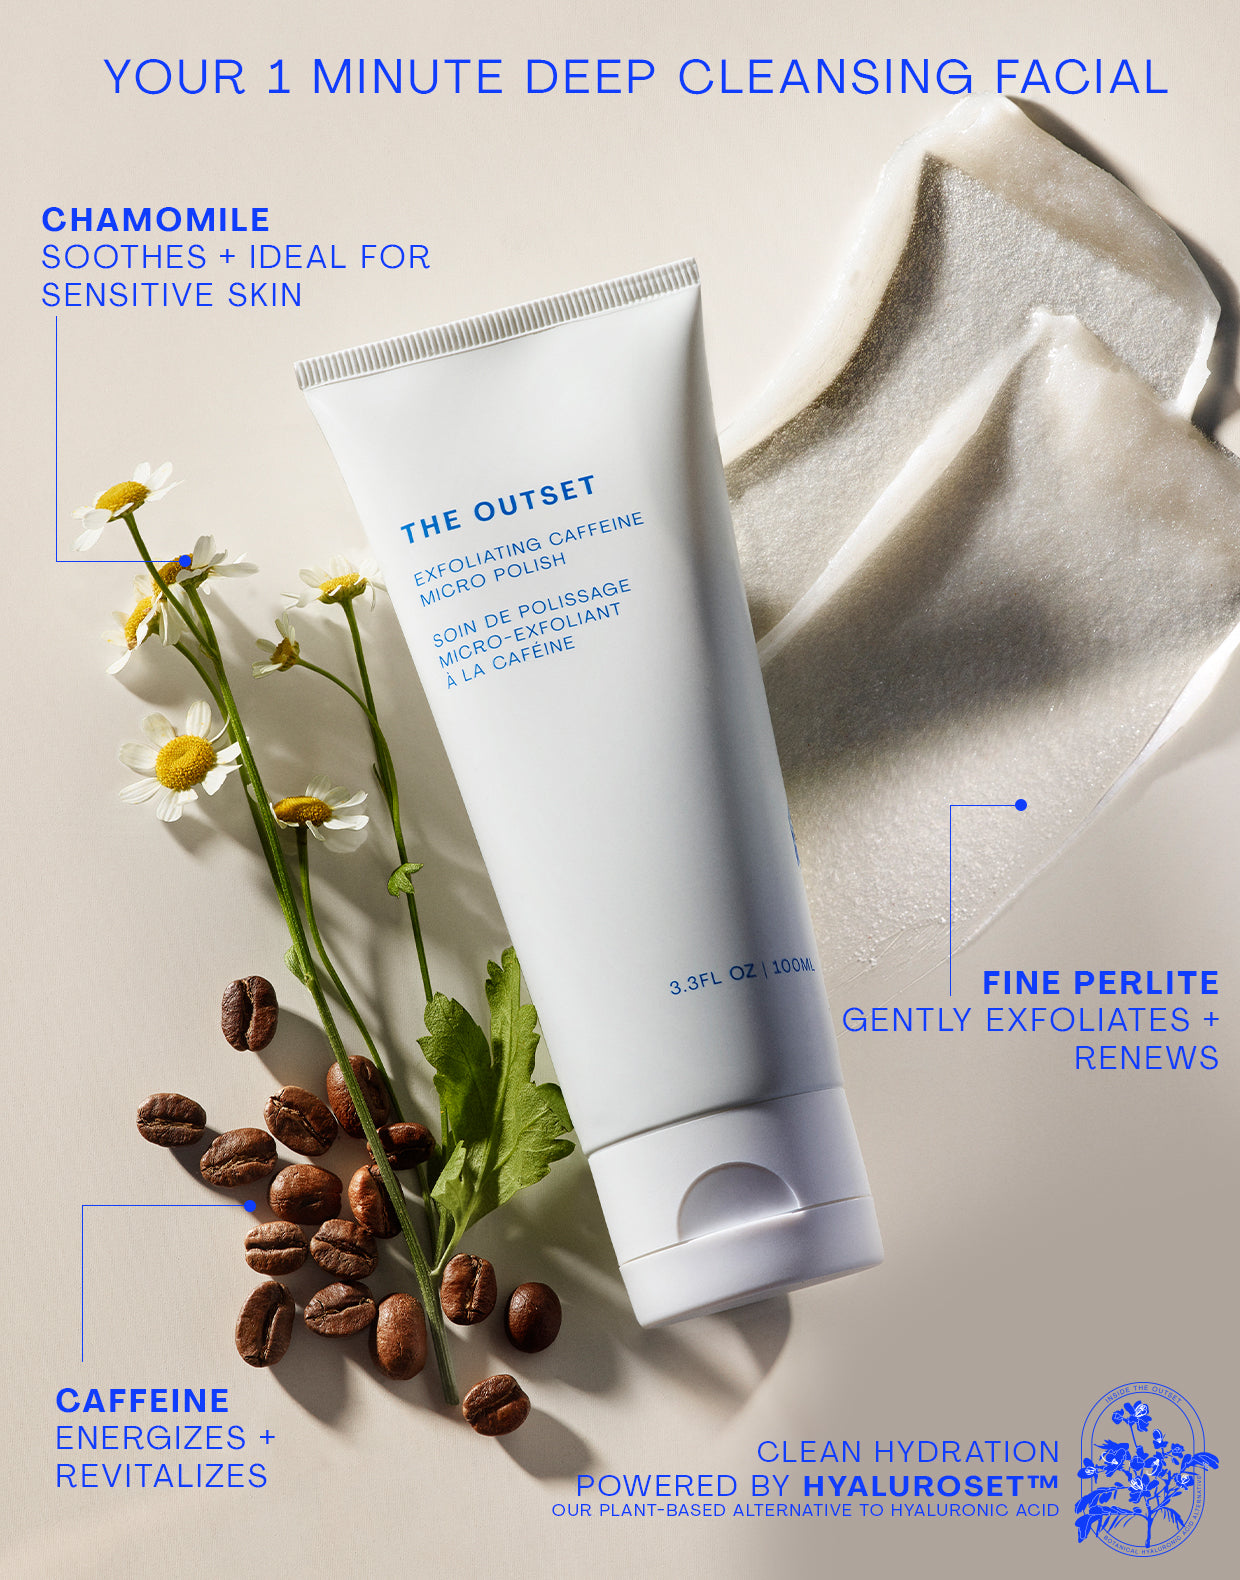 Photo of The Outset’s exfoliating caffeine micro polish with ingredients and info graphic; chamomile soothes + ideal for sensitive skin, fine perlite gently exfoliates + renews, caffeine energizes + revitalizes;  clean hydration powered by Hyaluroset(TM) our plant-based alternative to hyaluronic acid